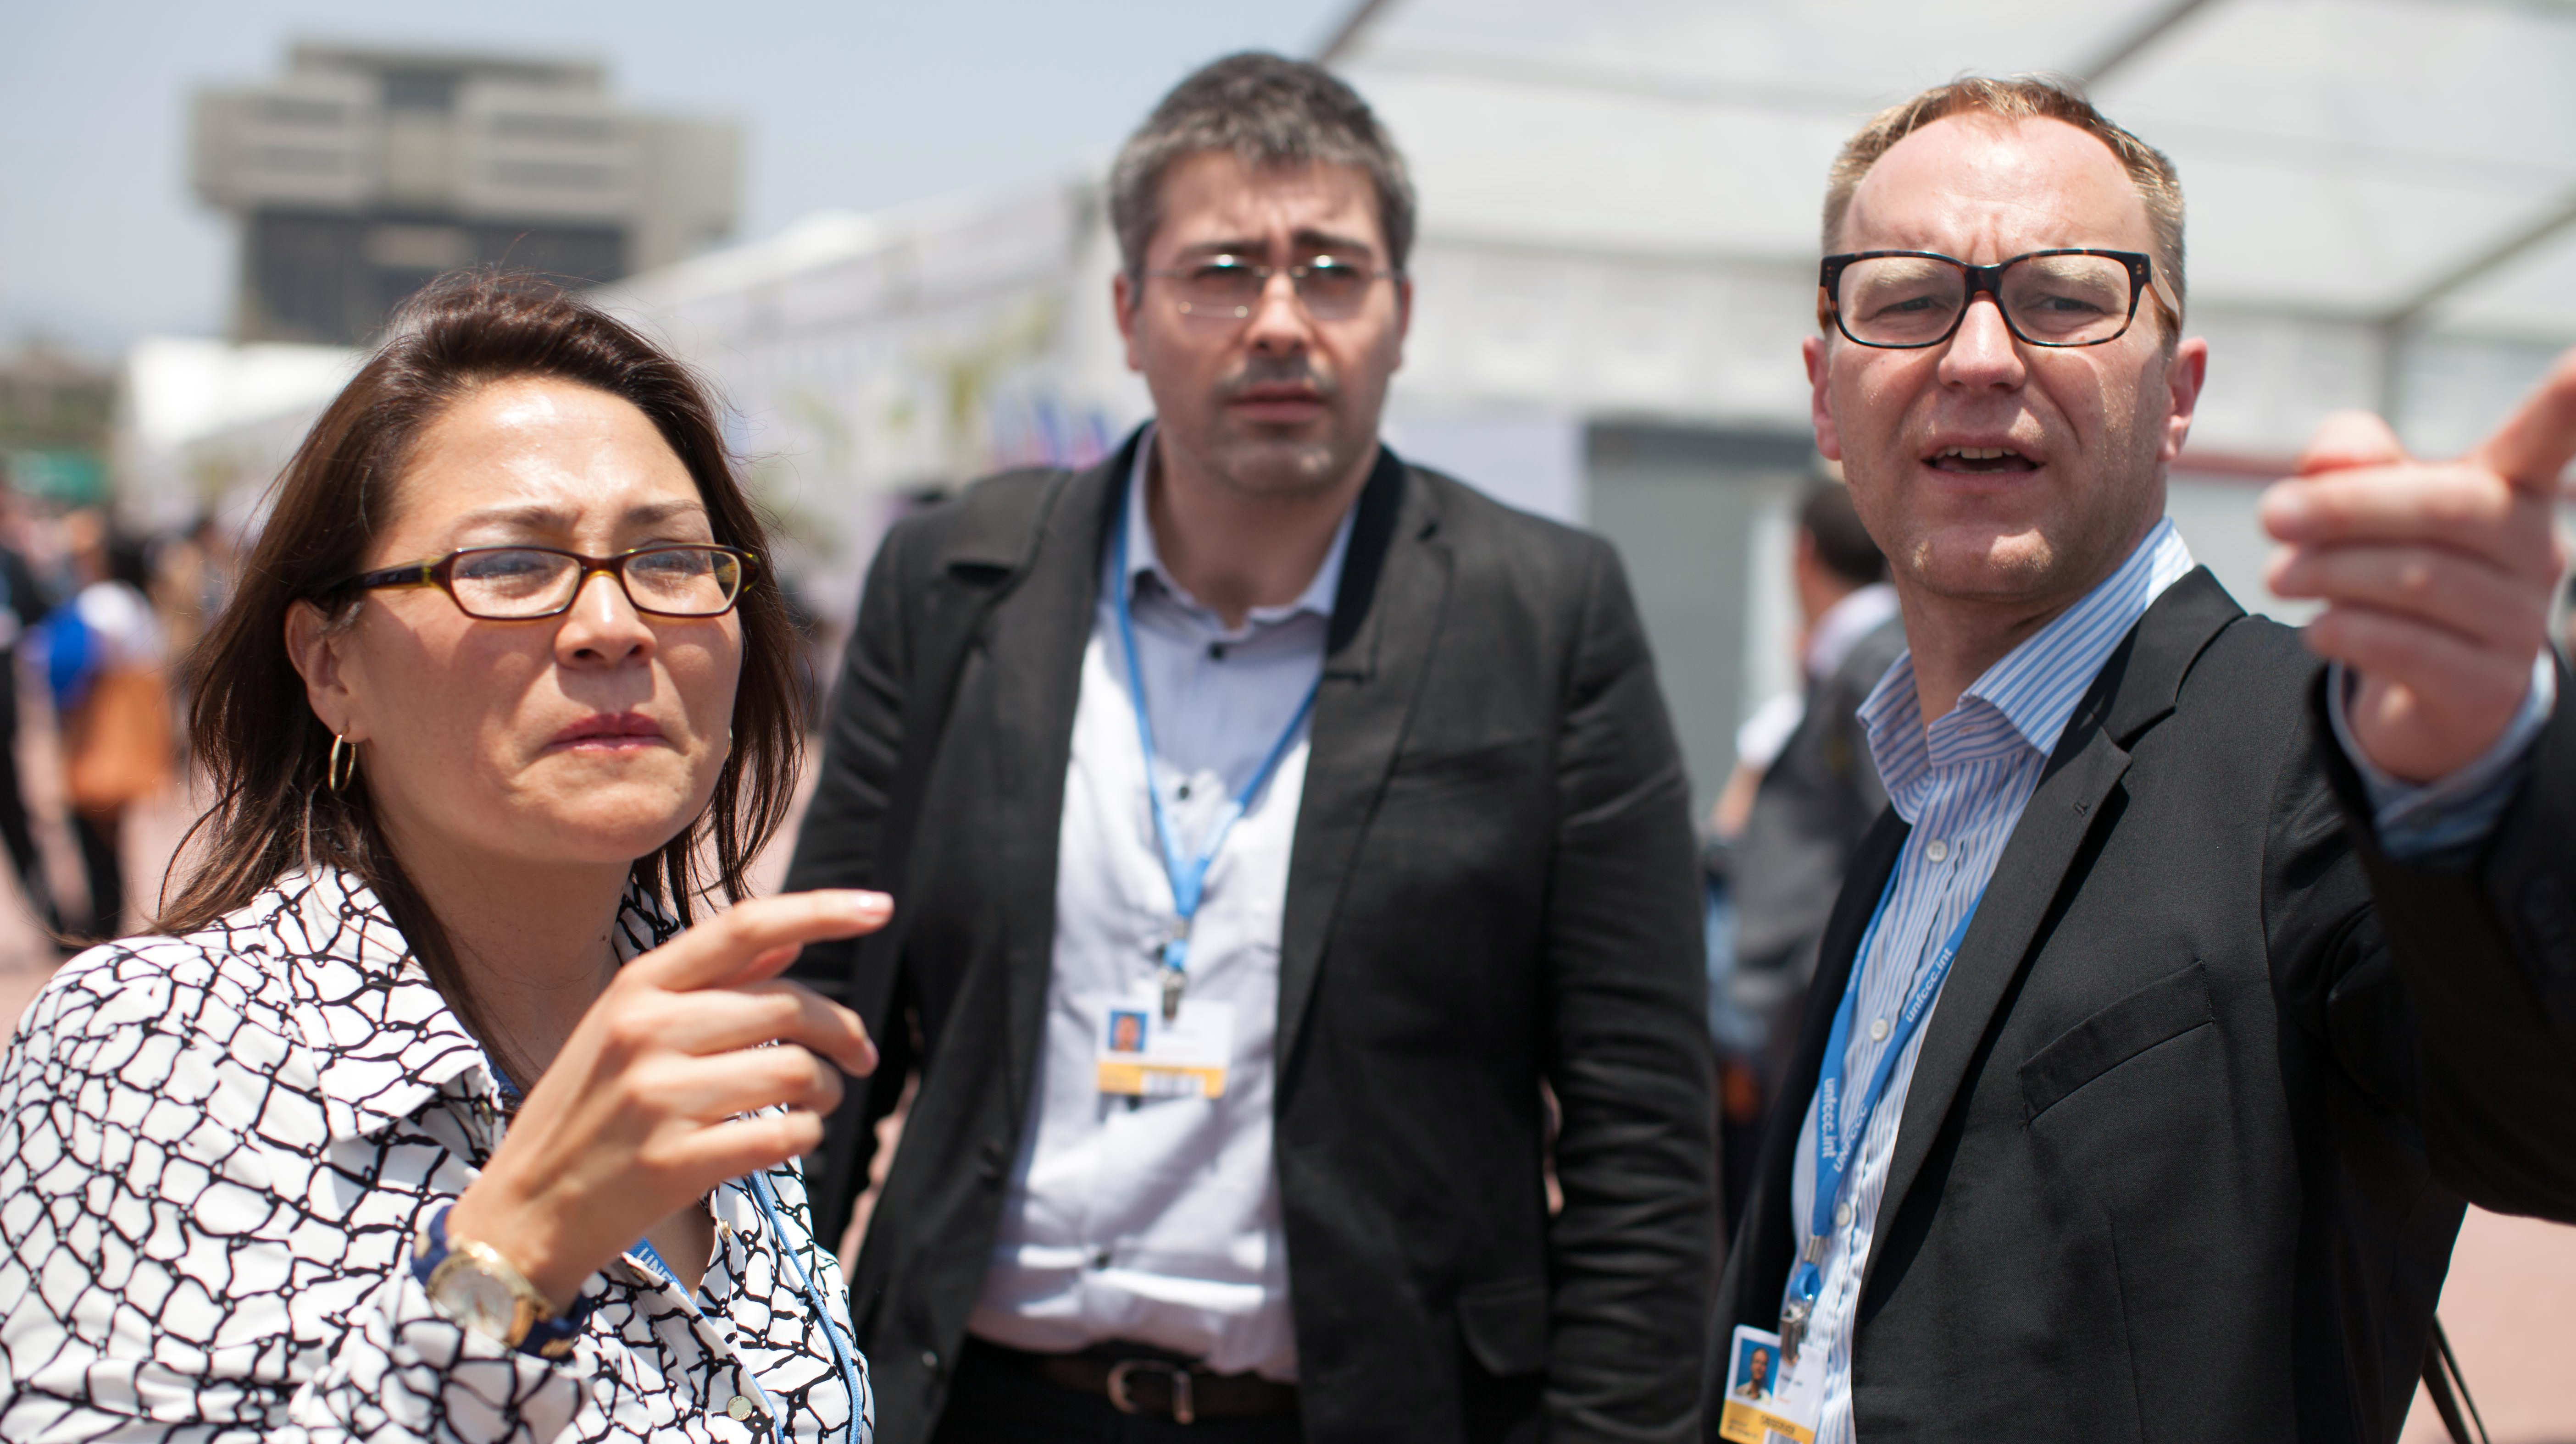 Petter Lydén (right) at UN climate negotiations in Lima, Peru, December 2014. Photo: Sean Hawkey/LWF